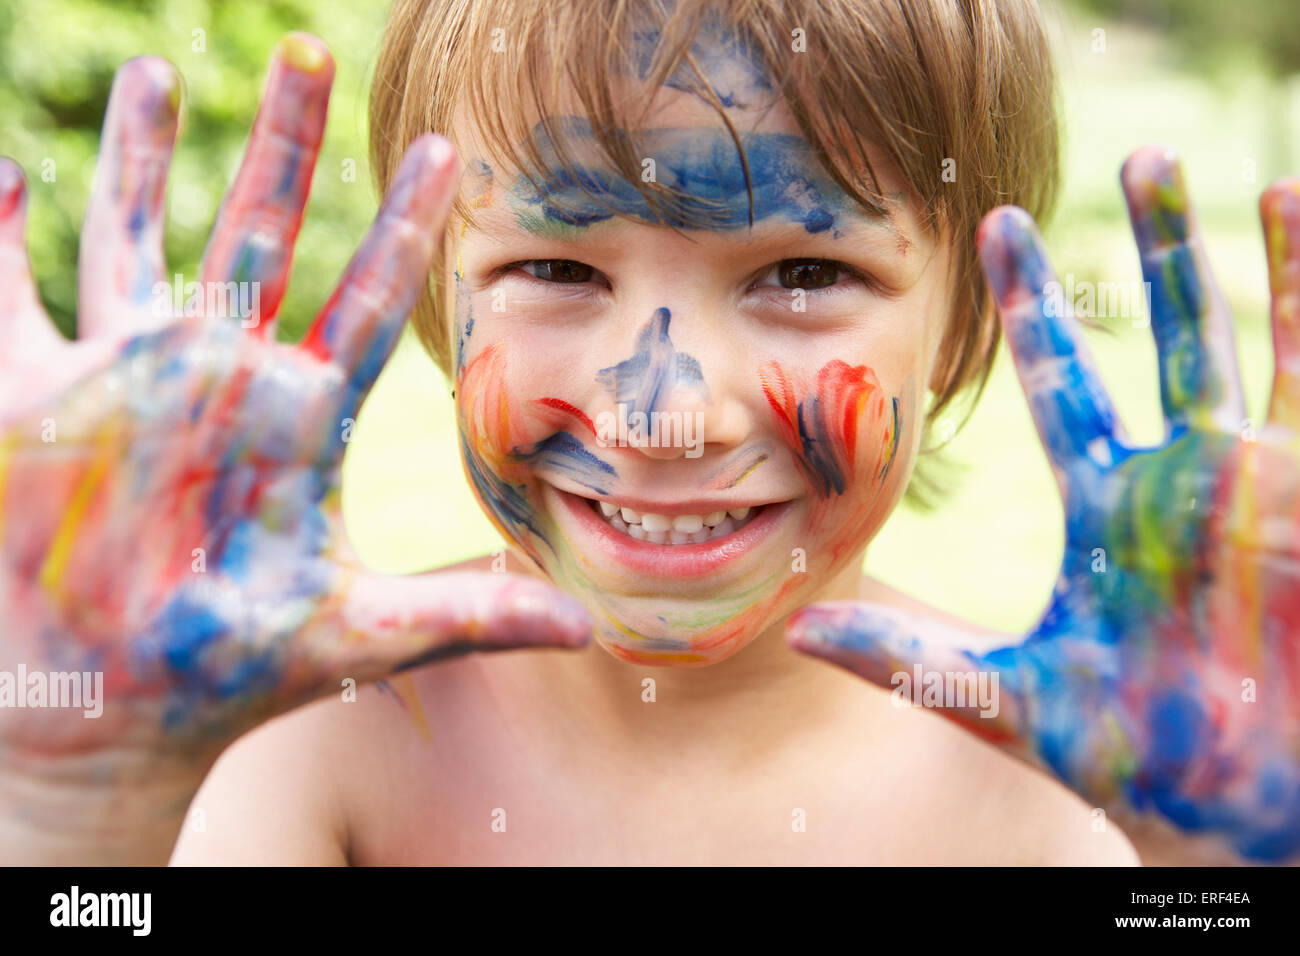 Head And Shoulders Portrait Of Boy With Painted Face and Hands Stock Photo